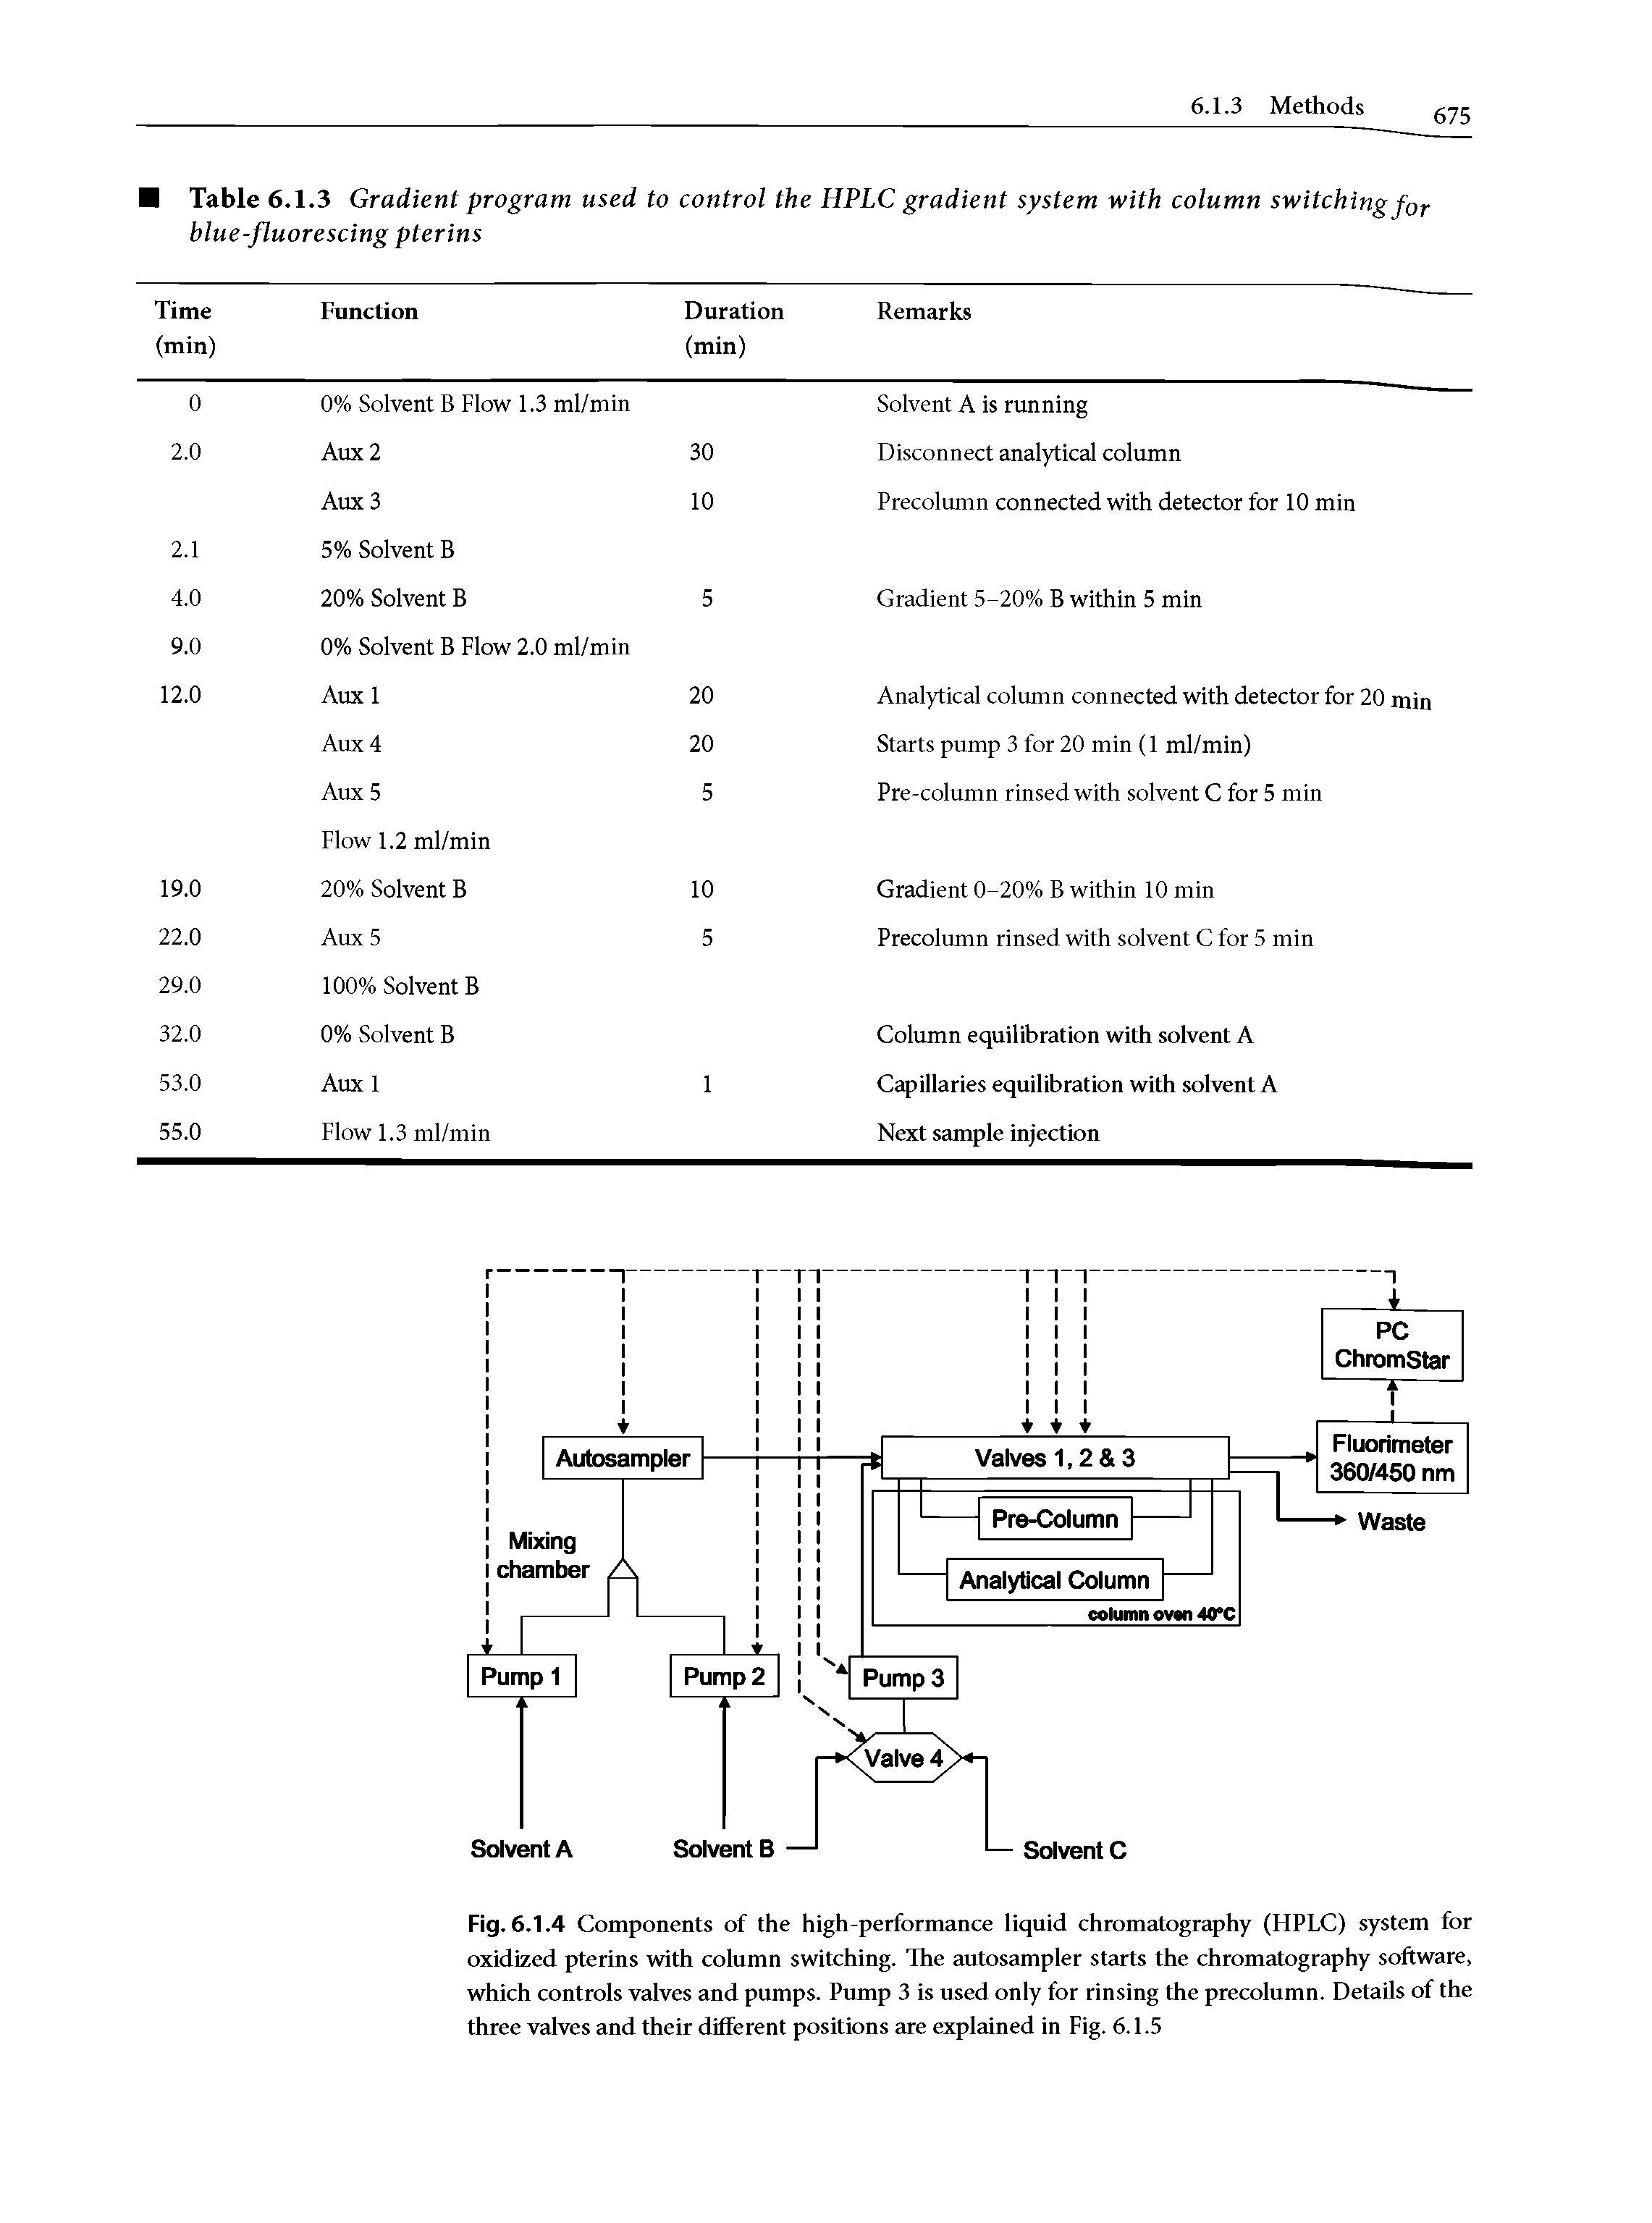 Fig. 6.1.4 Components of the high-performance liquid chromatography (HPLC) system for oxidized pterins with column switching. The autosampler starts the chromatography software, which controls valves and pumps. Pump 3 is used only for rinsing the precolumn. Details of the three valves and their different positions are explained in Fig. 6.1.5...